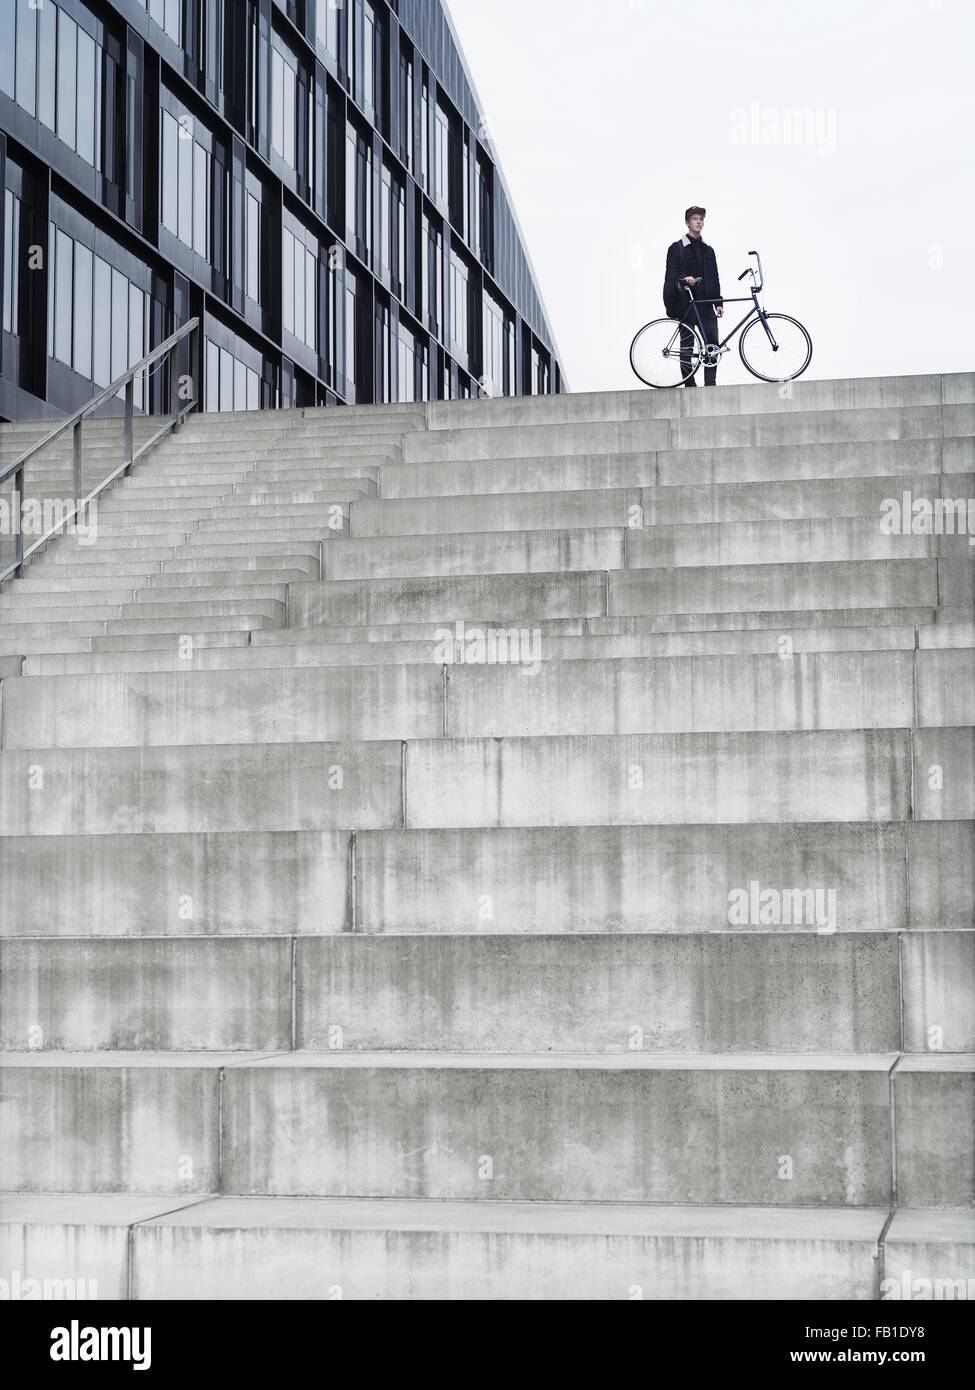 Urban cyclist with bicycle standing on top of stairway Stock Photo